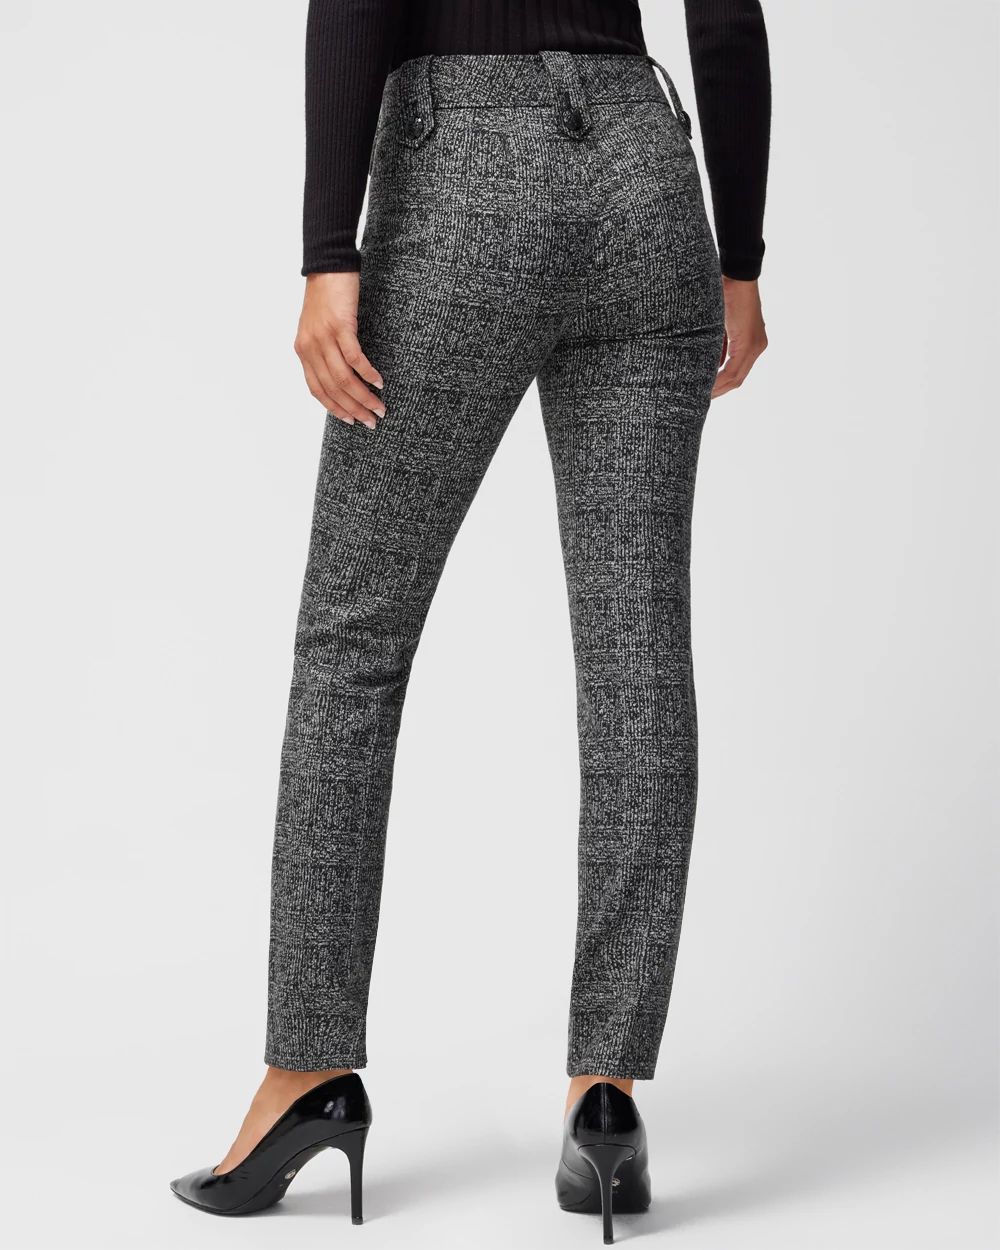 WHBM® Jolie Glenn Plaid Button Straight Pant click to view larger image.